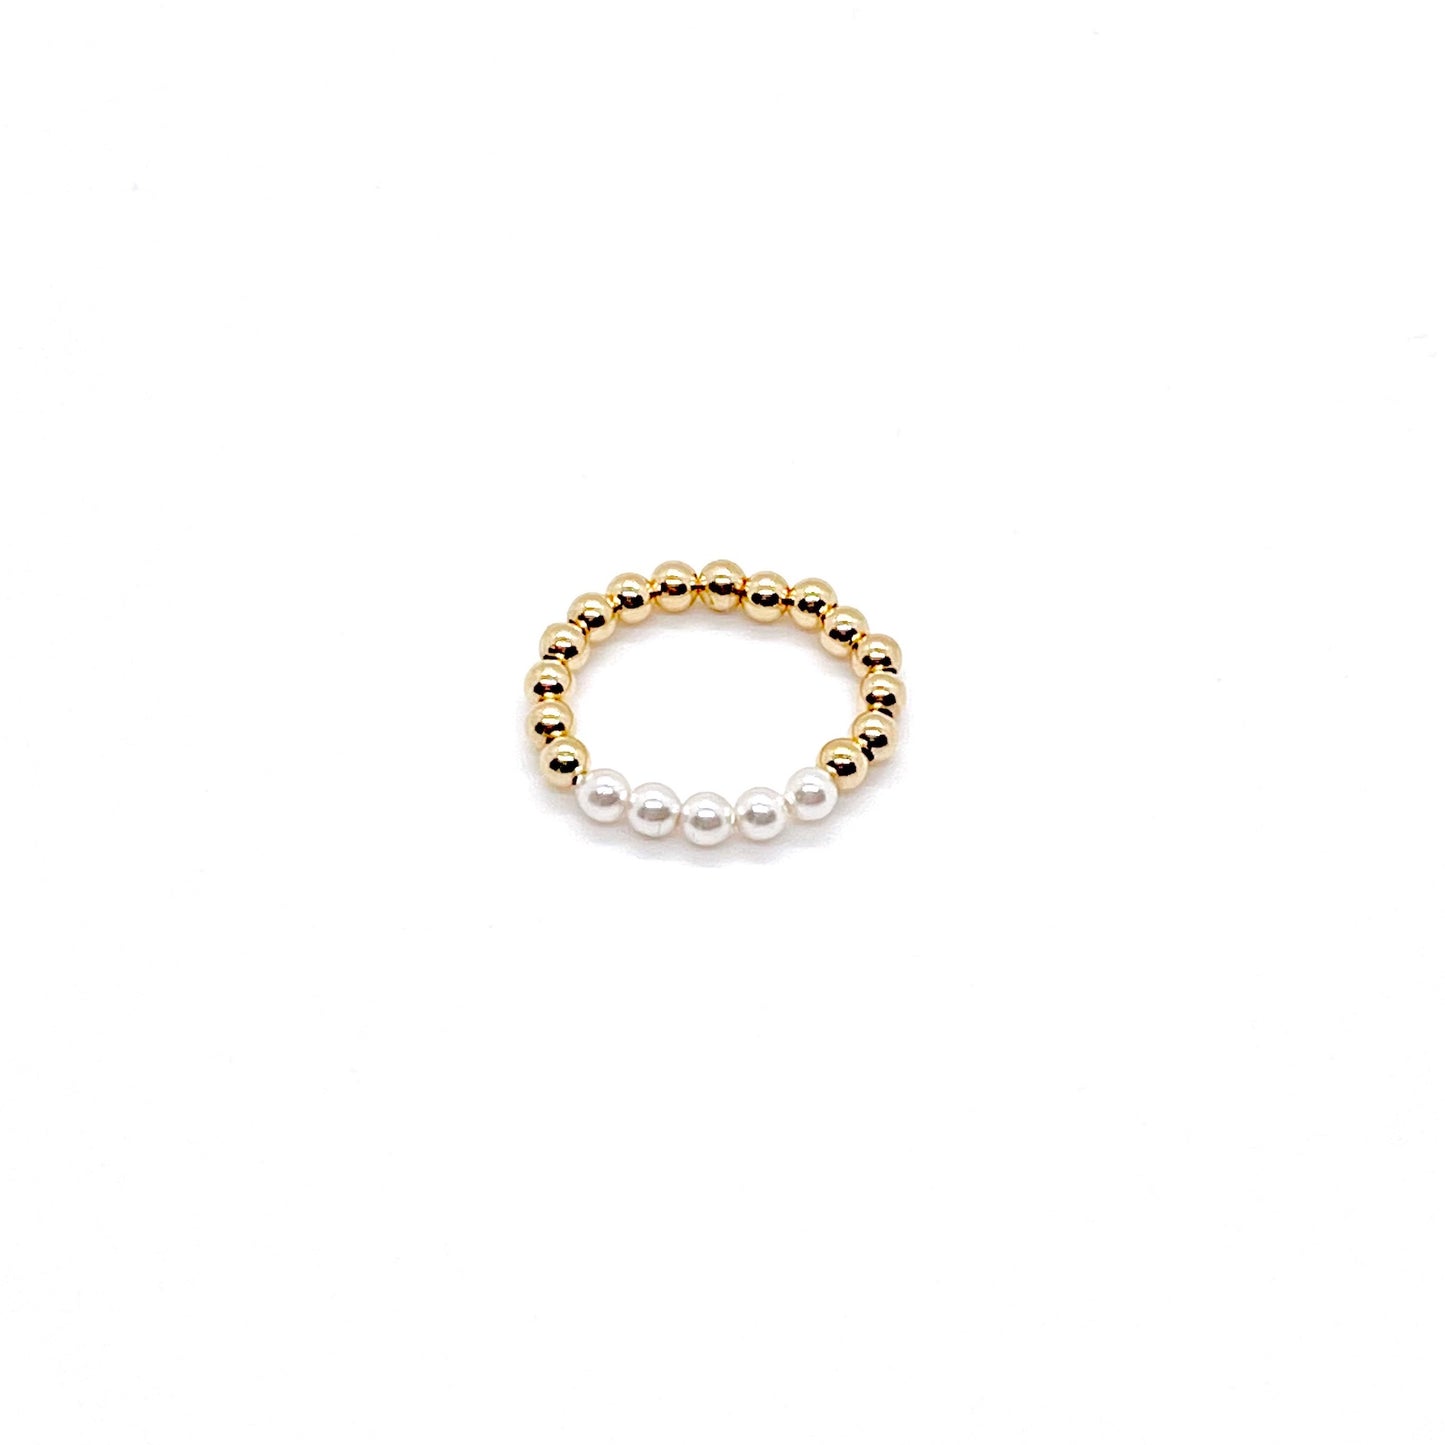 Pearl bead ring with a 3mm 14K gold filled beaded stretch band and a row of crystal pearl beads in the center.